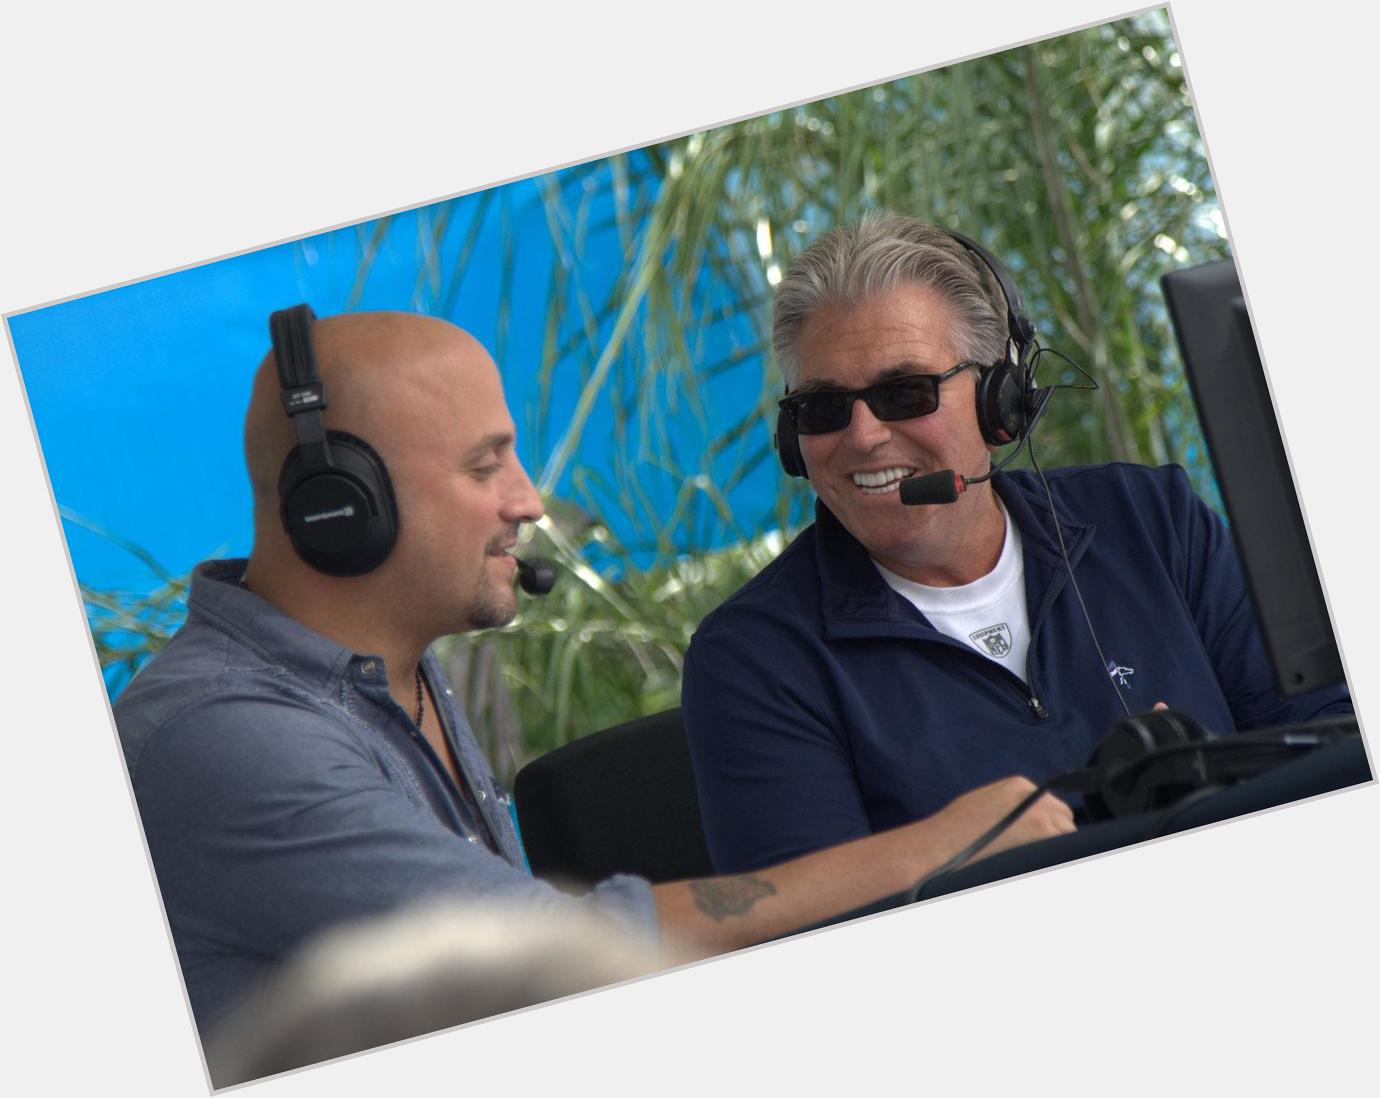   to wish the great Mike Francesa a happy birthday!    